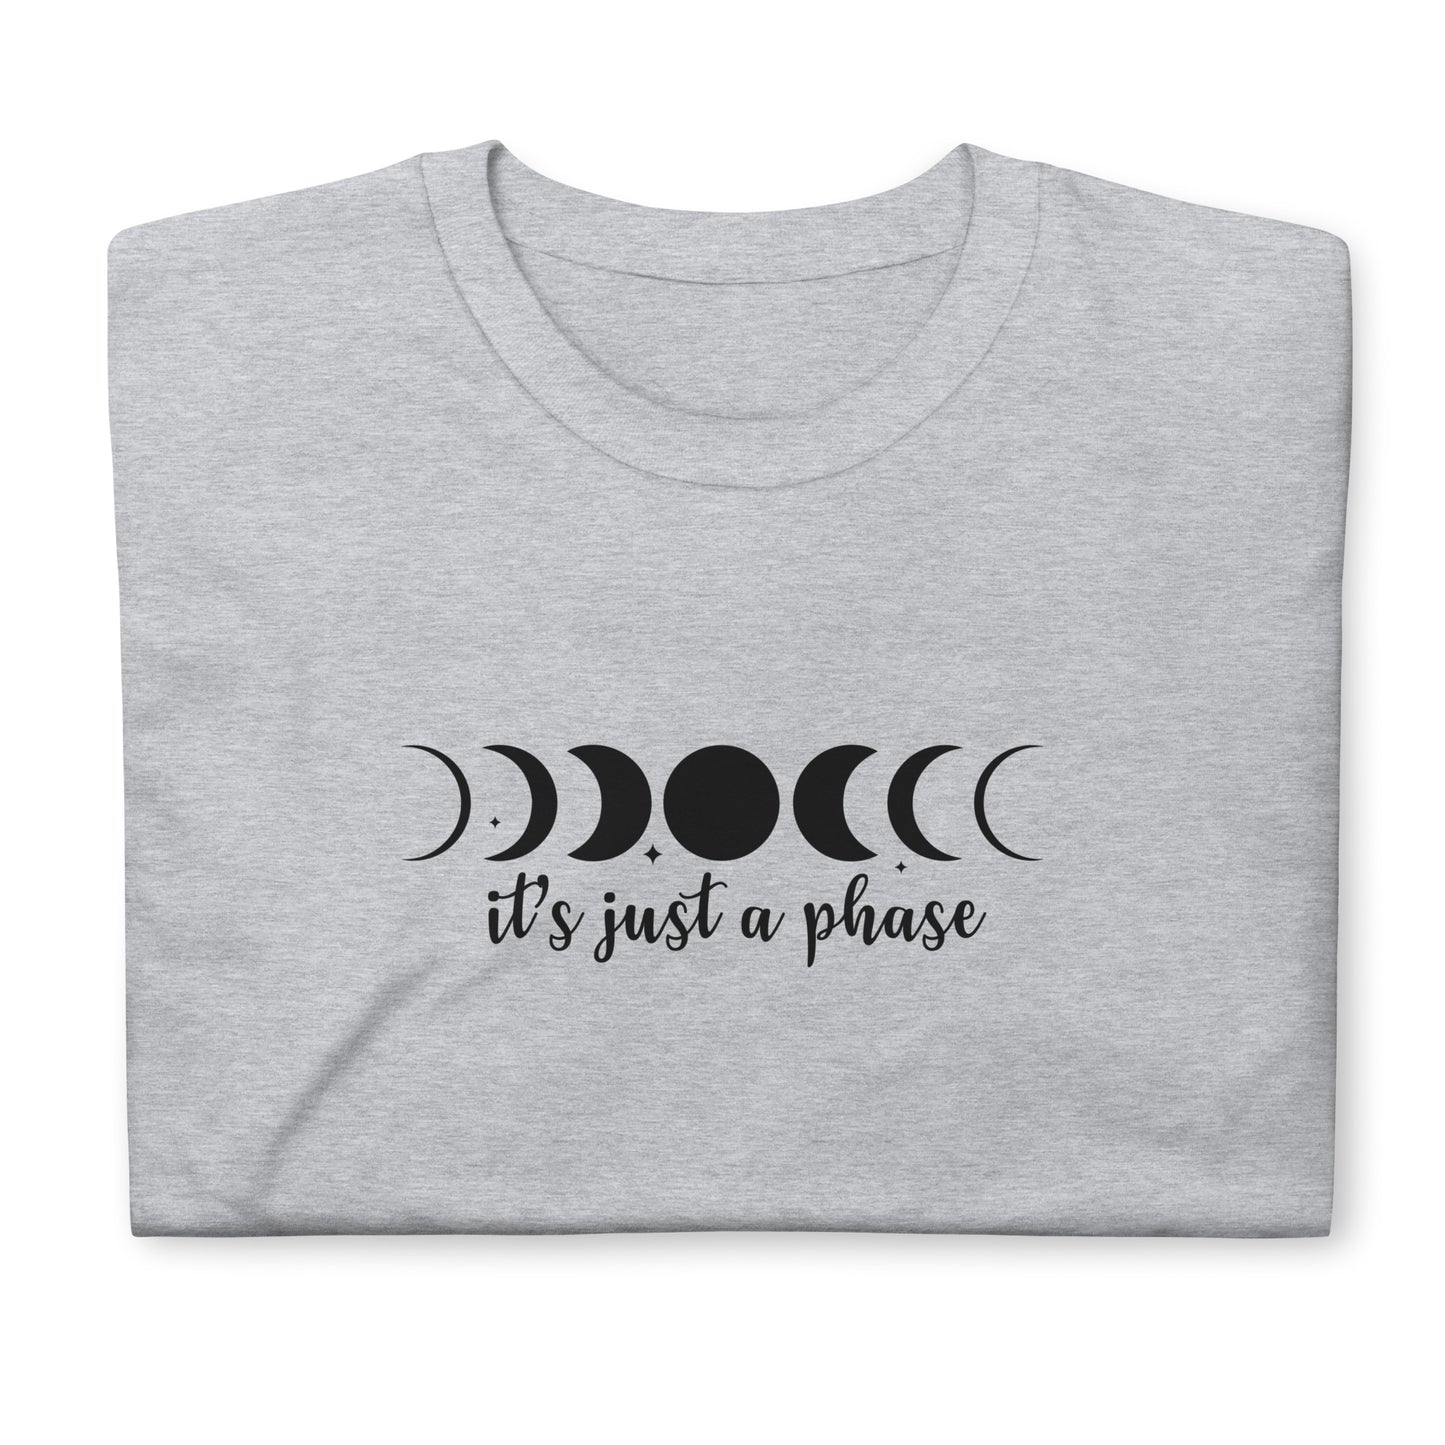 Unisex T-shirt: It's just a phase